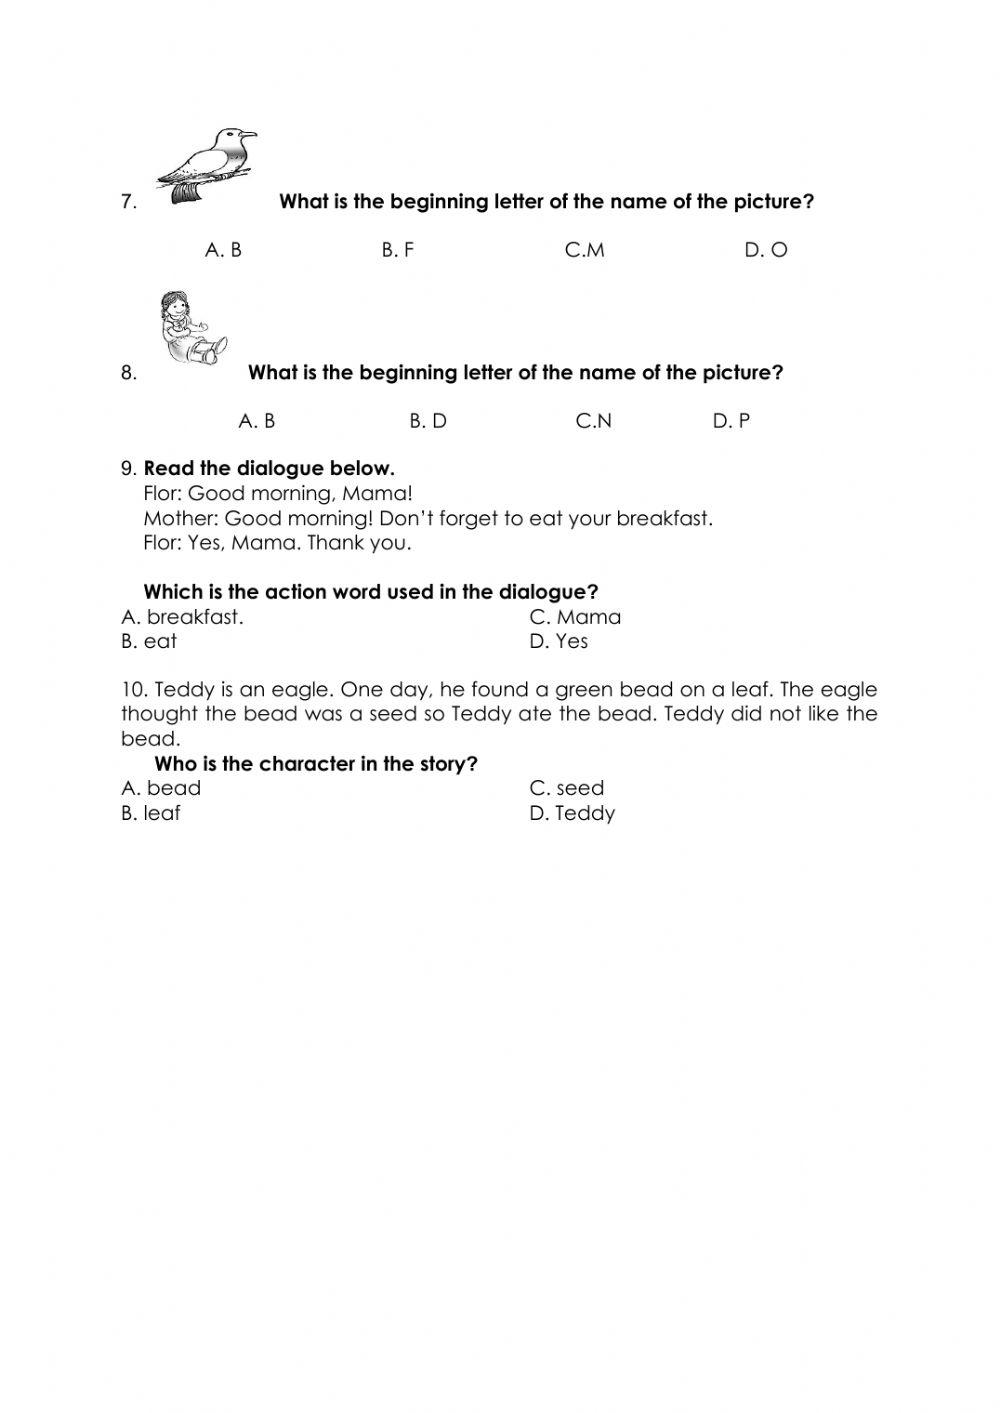 Diagnostic Test in English 2 Part 1